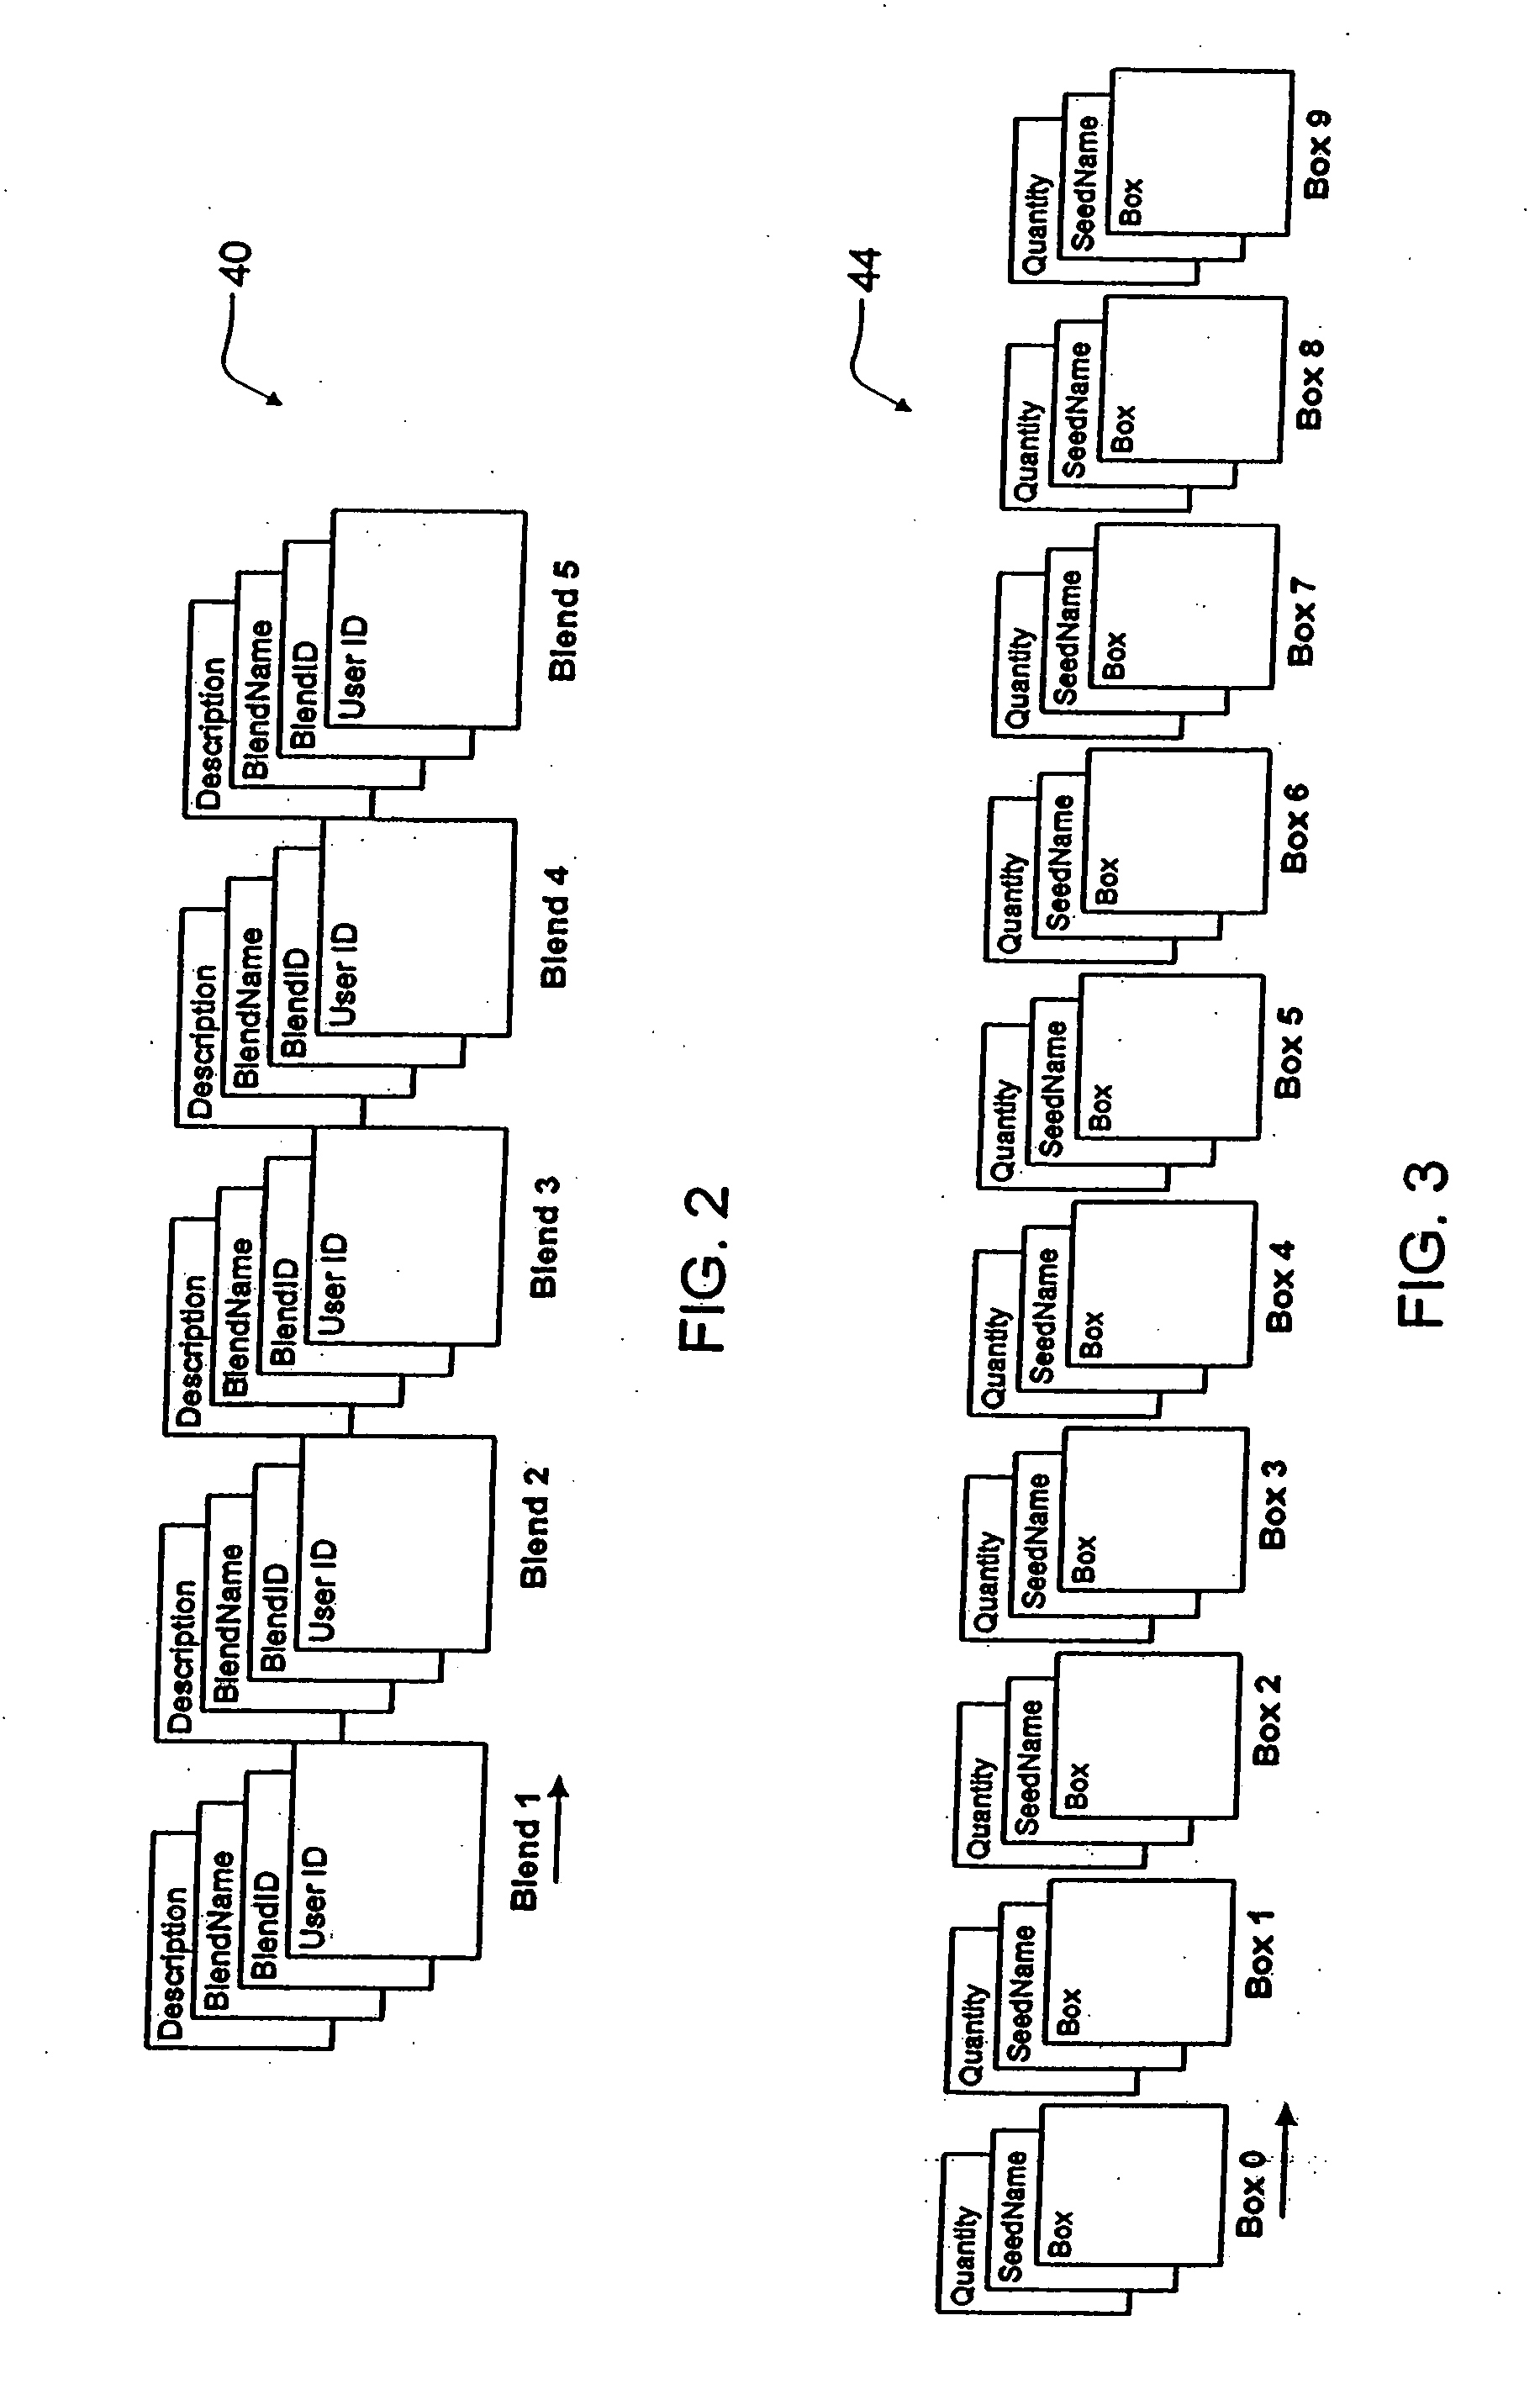 System and method for dispensing bulk products